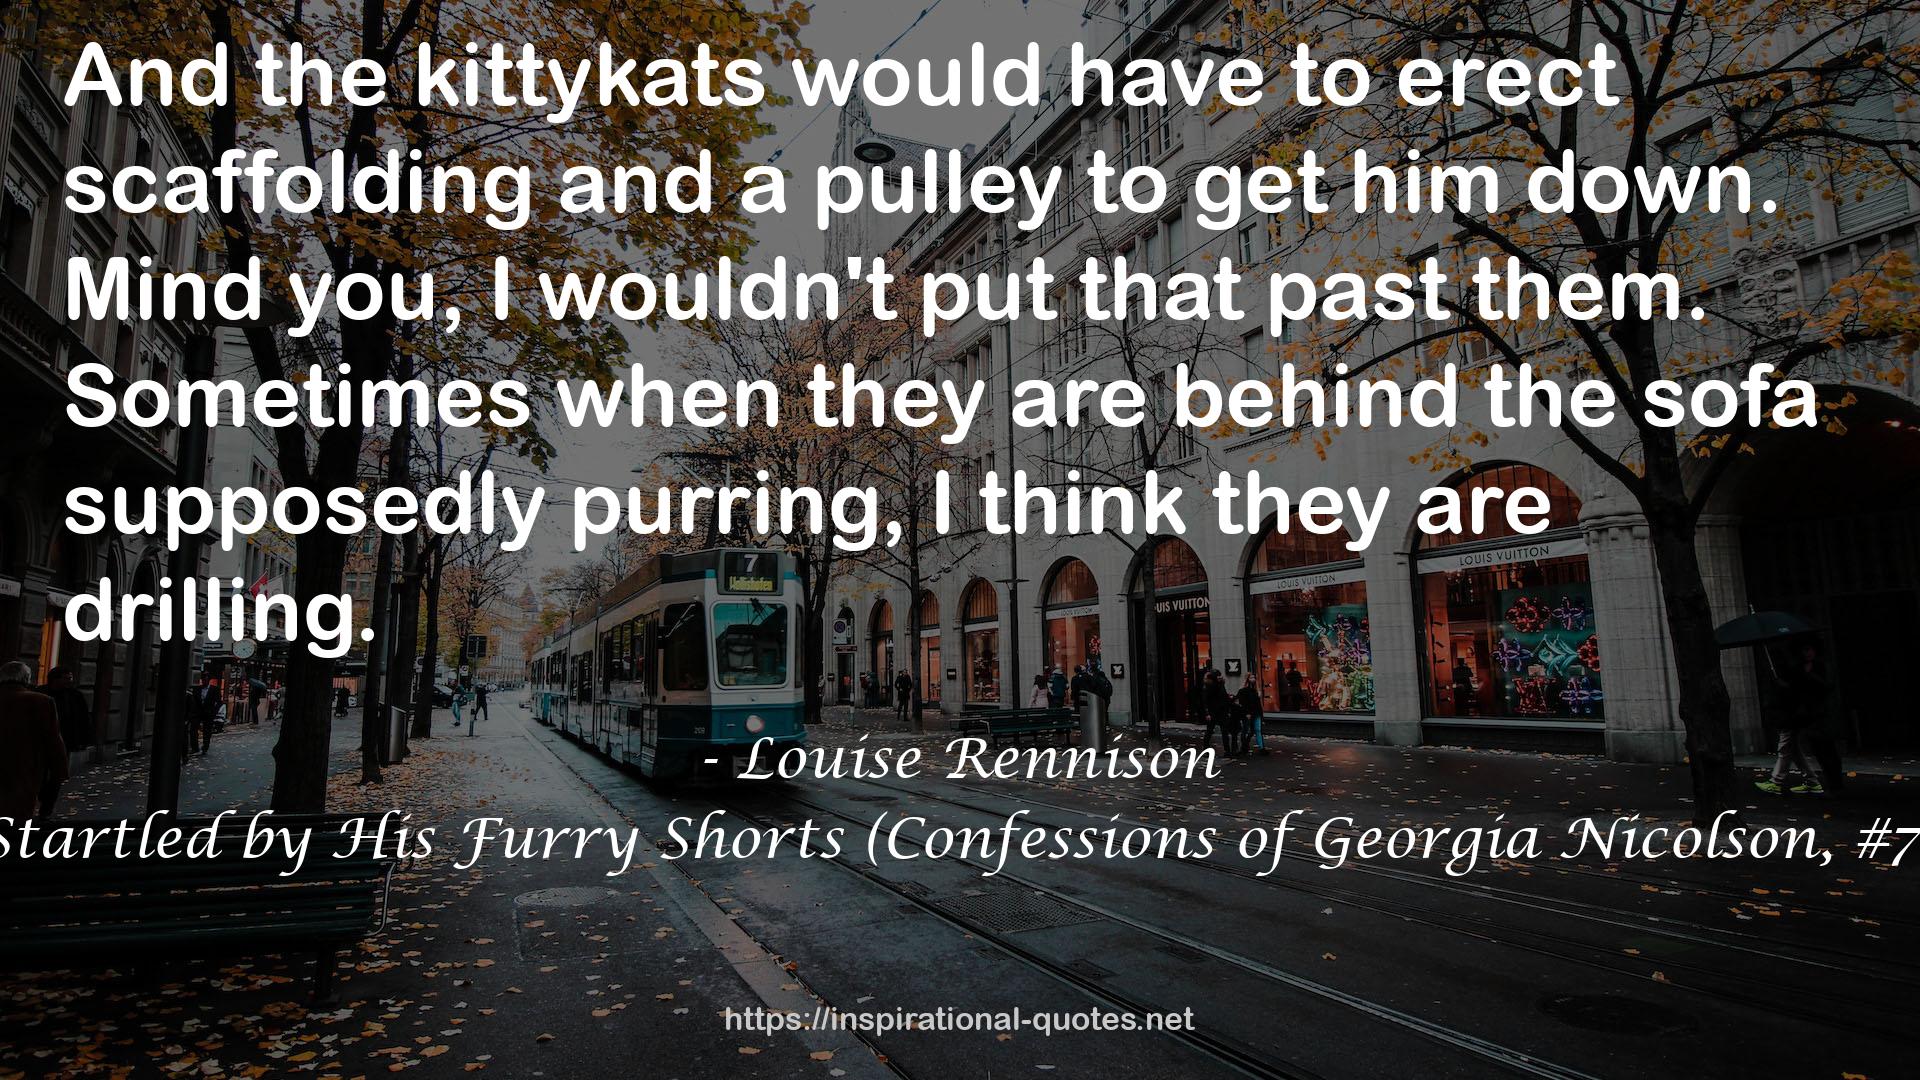 Startled by His Furry Shorts (Confessions of Georgia Nicolson, #7) QUOTES